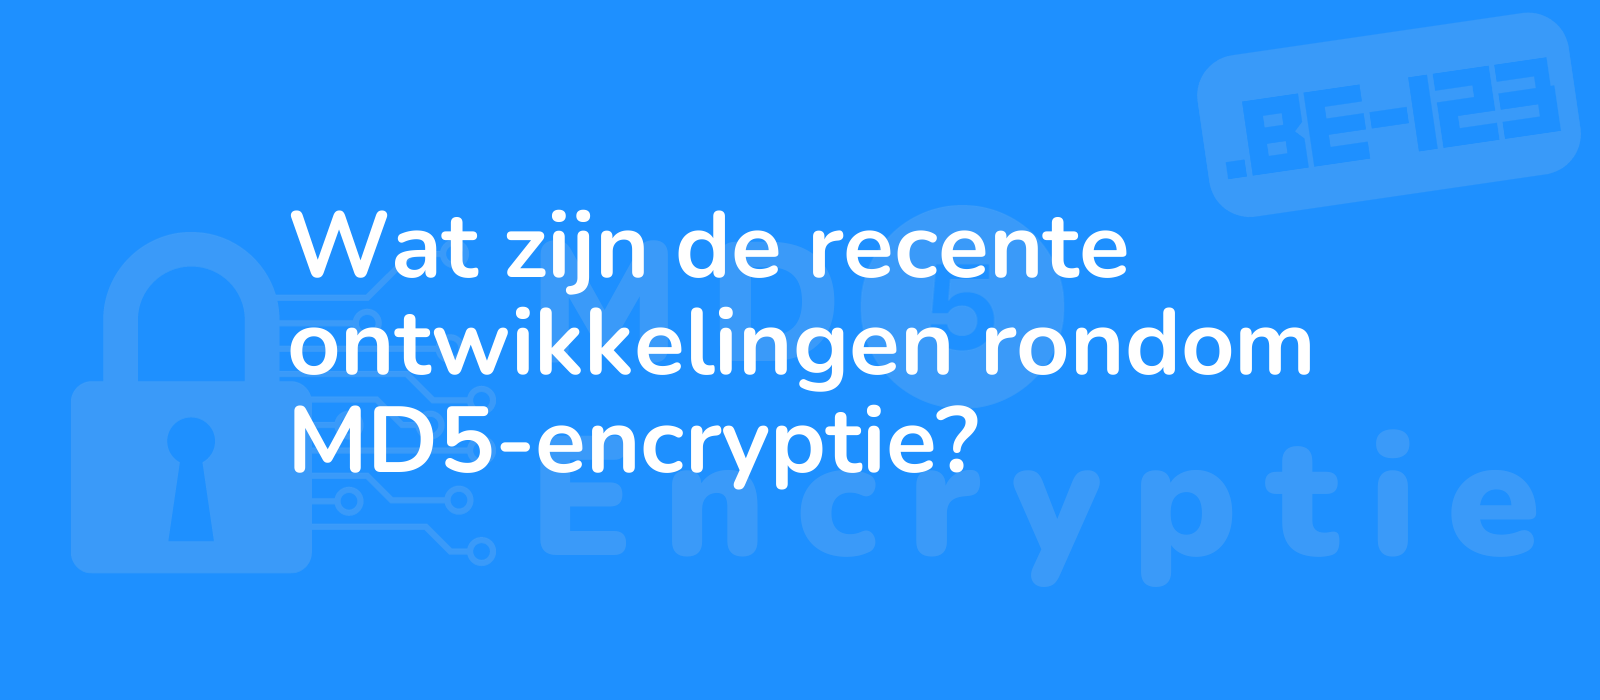 the description for the representative image of the title wat zijn de recente ontwikkelingen rondom md5 encryptie could be illustrative depiction of evolving technology in md5 encryption with futuristic elements and vibrant colors 8k resolution